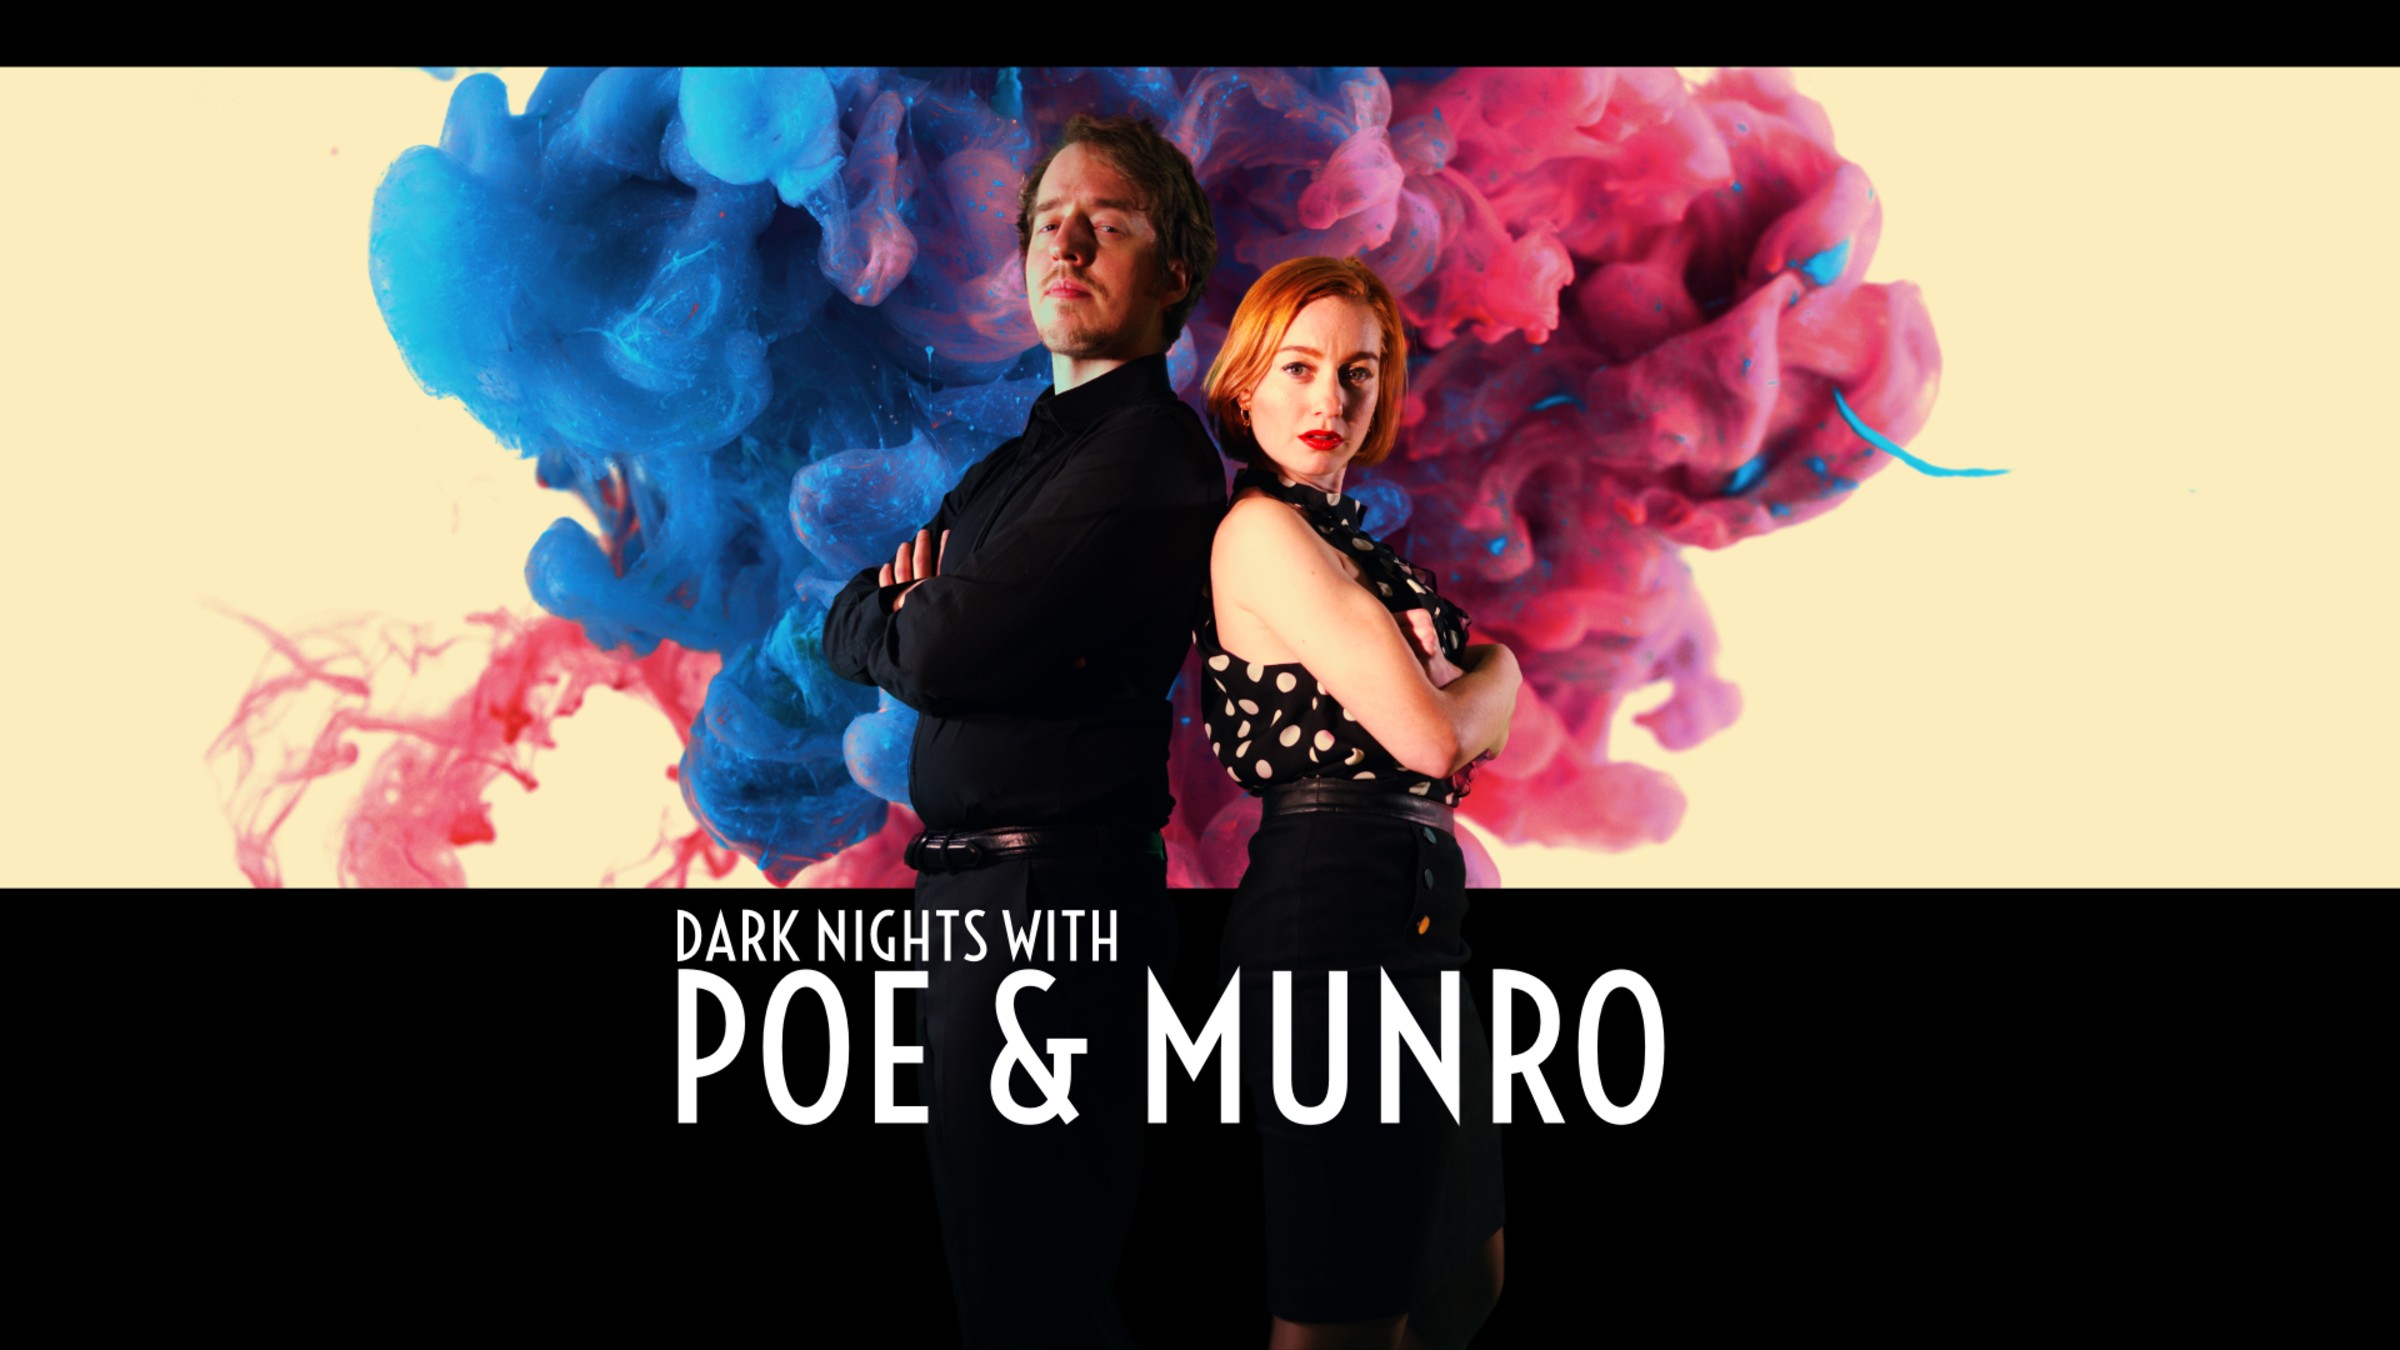 dark-nights-with-poe-and-munro-for-nintendo-switch-nintendo-official-site